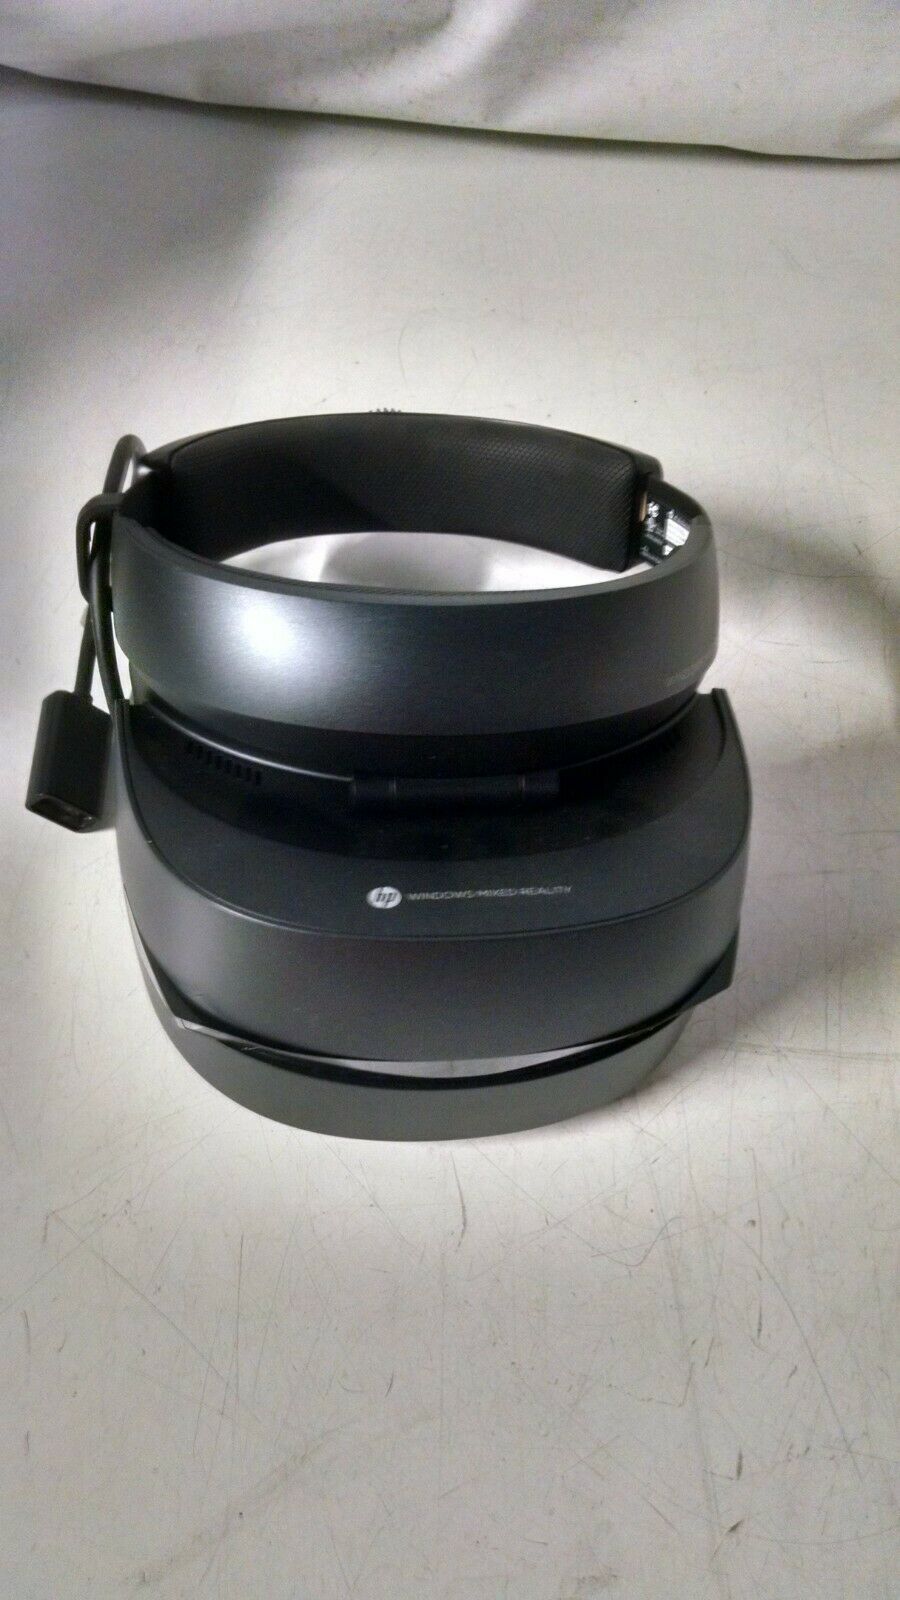 Hp Windows Mixed Vr1000-100 Vr Reality Headset Replacement -headset Only